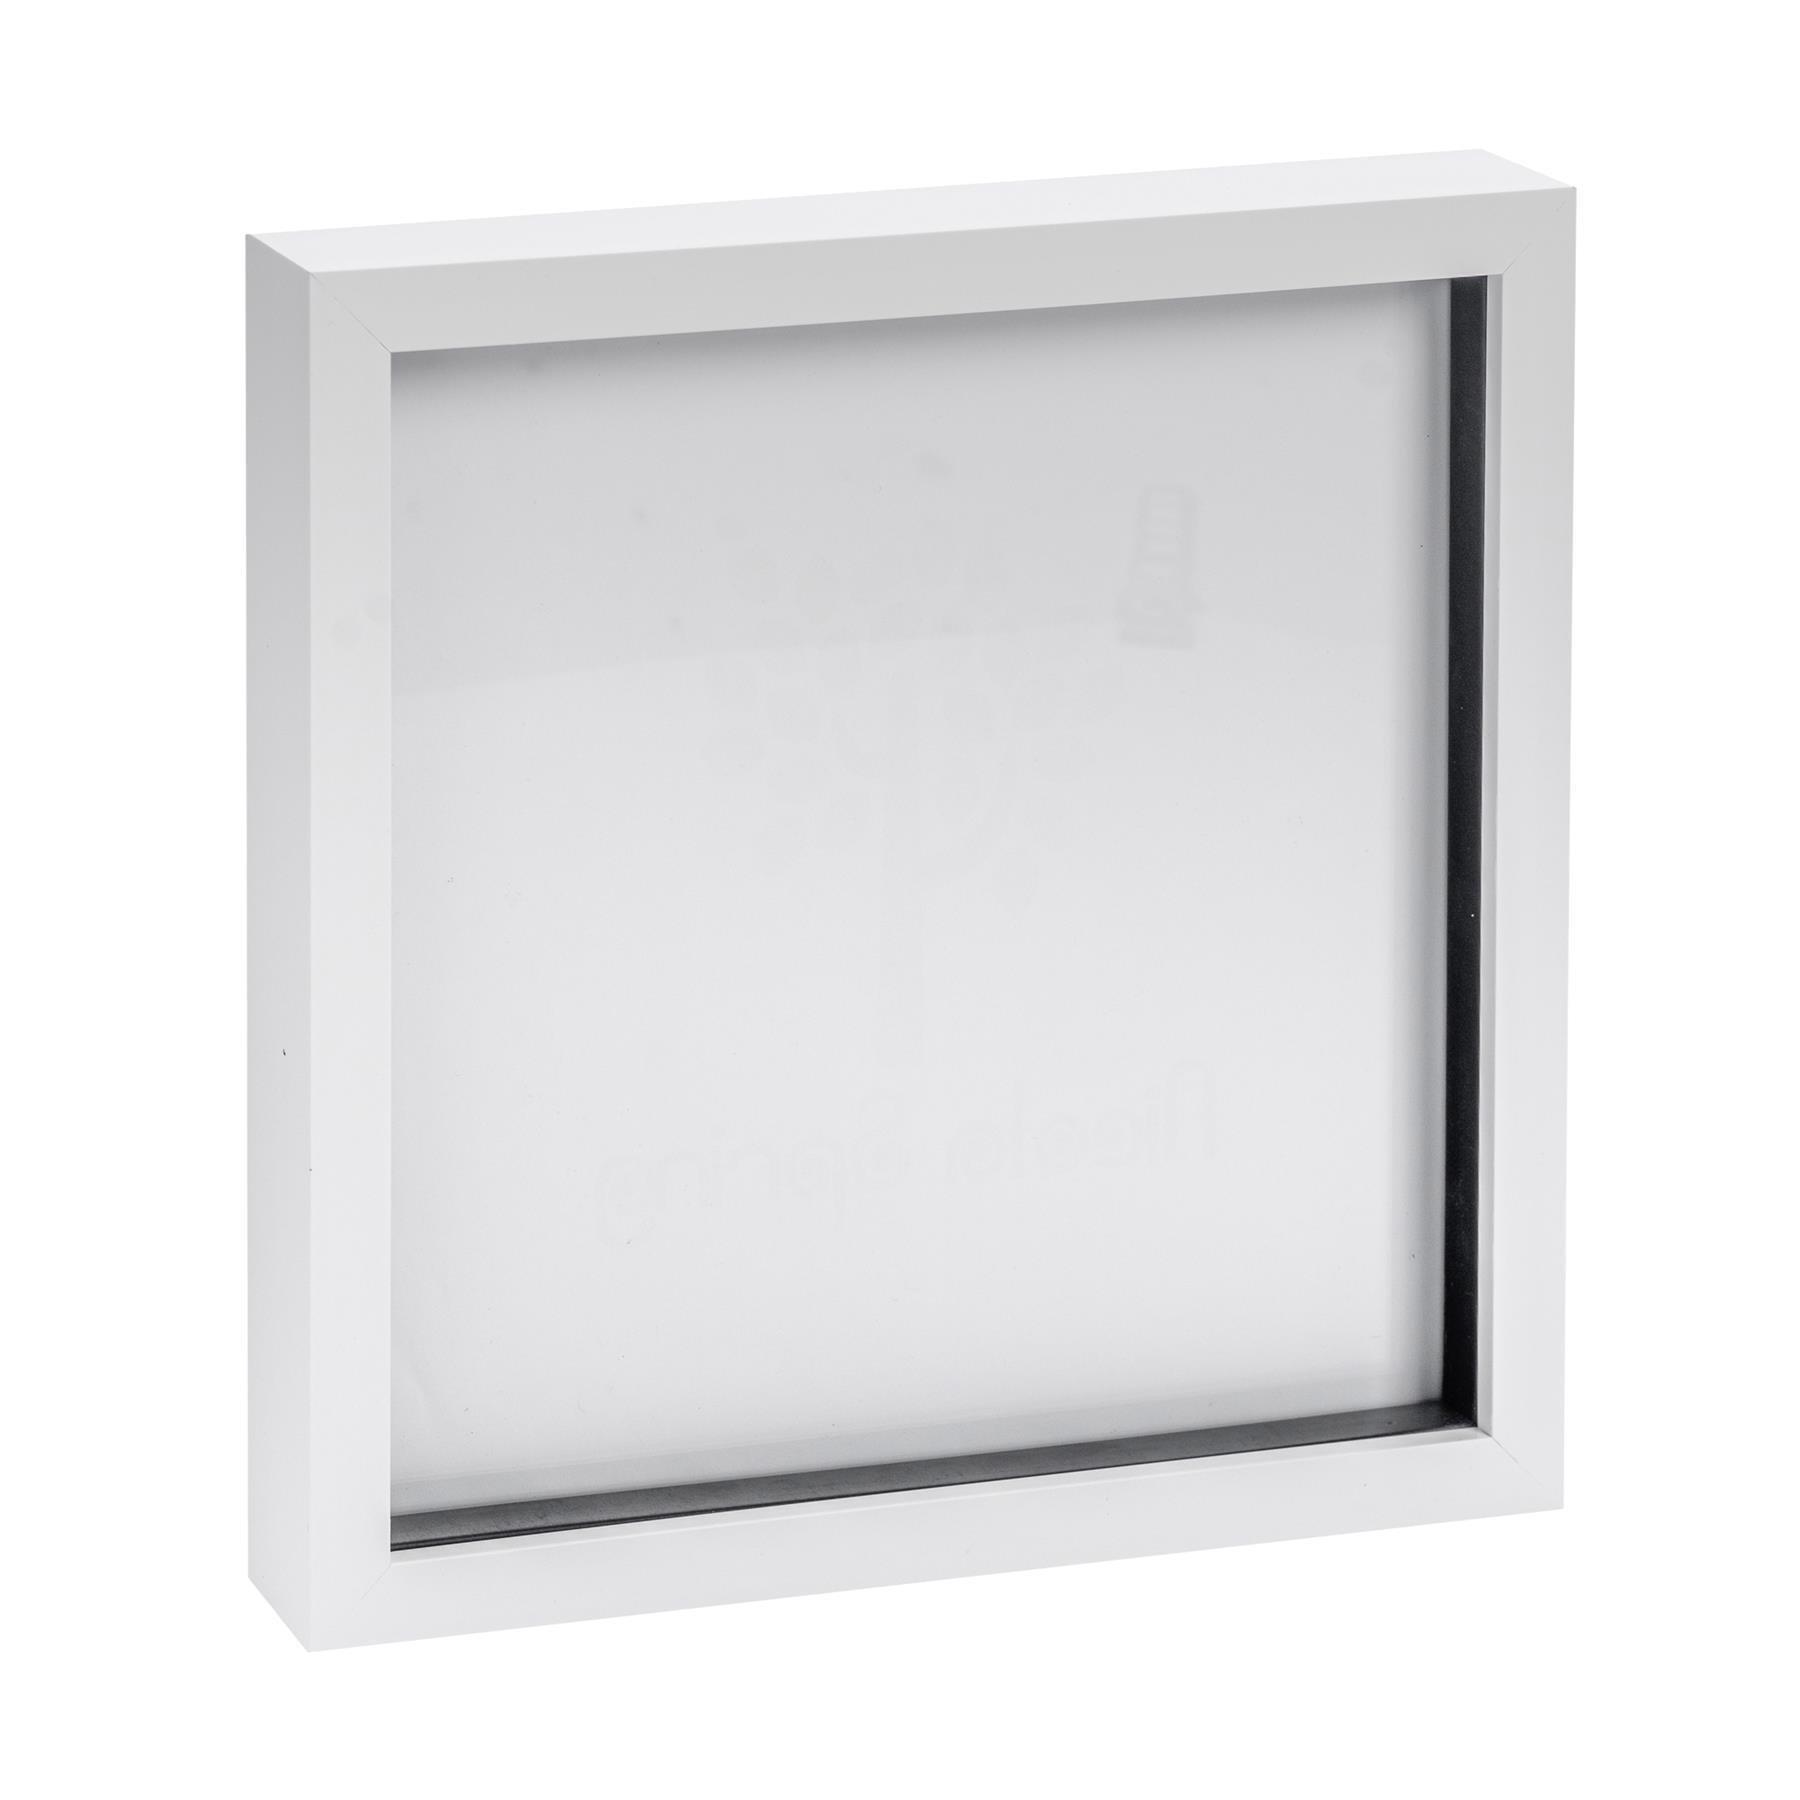 Effect Picture Frame white